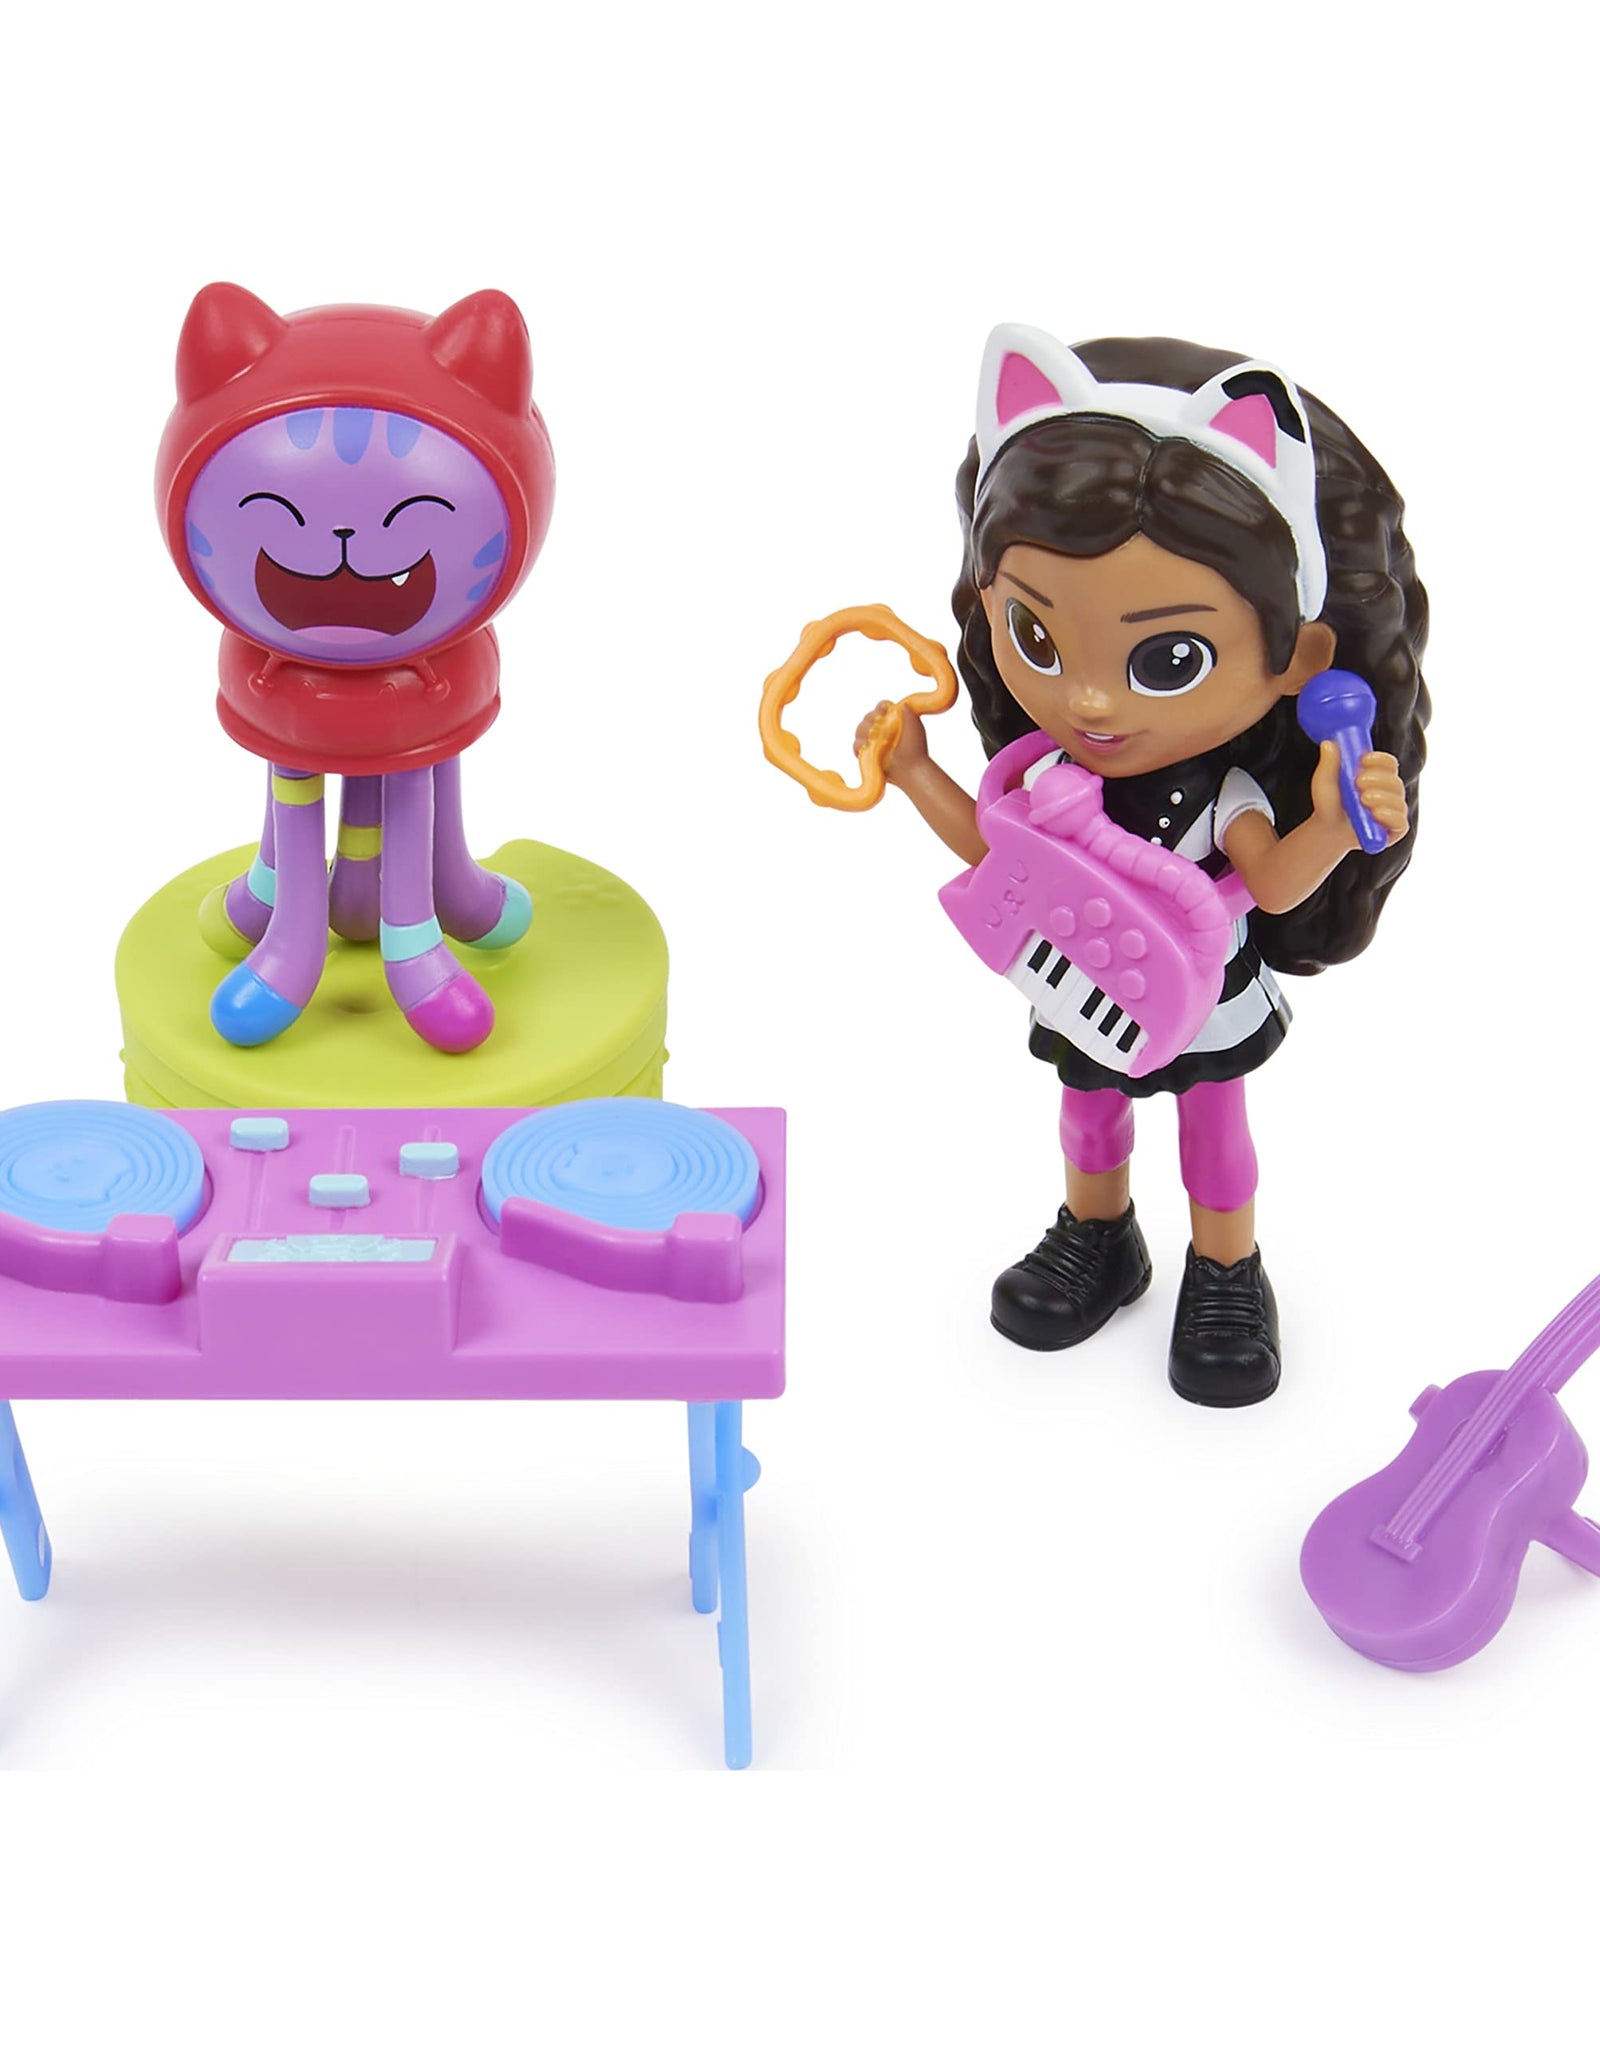 Gabby's Dollhouse, Kitty Karaoke Set with 2 Toy Figures, 2 Accessories, Delivery and Furniture Piece, Kids Toys for Ages 3 and up